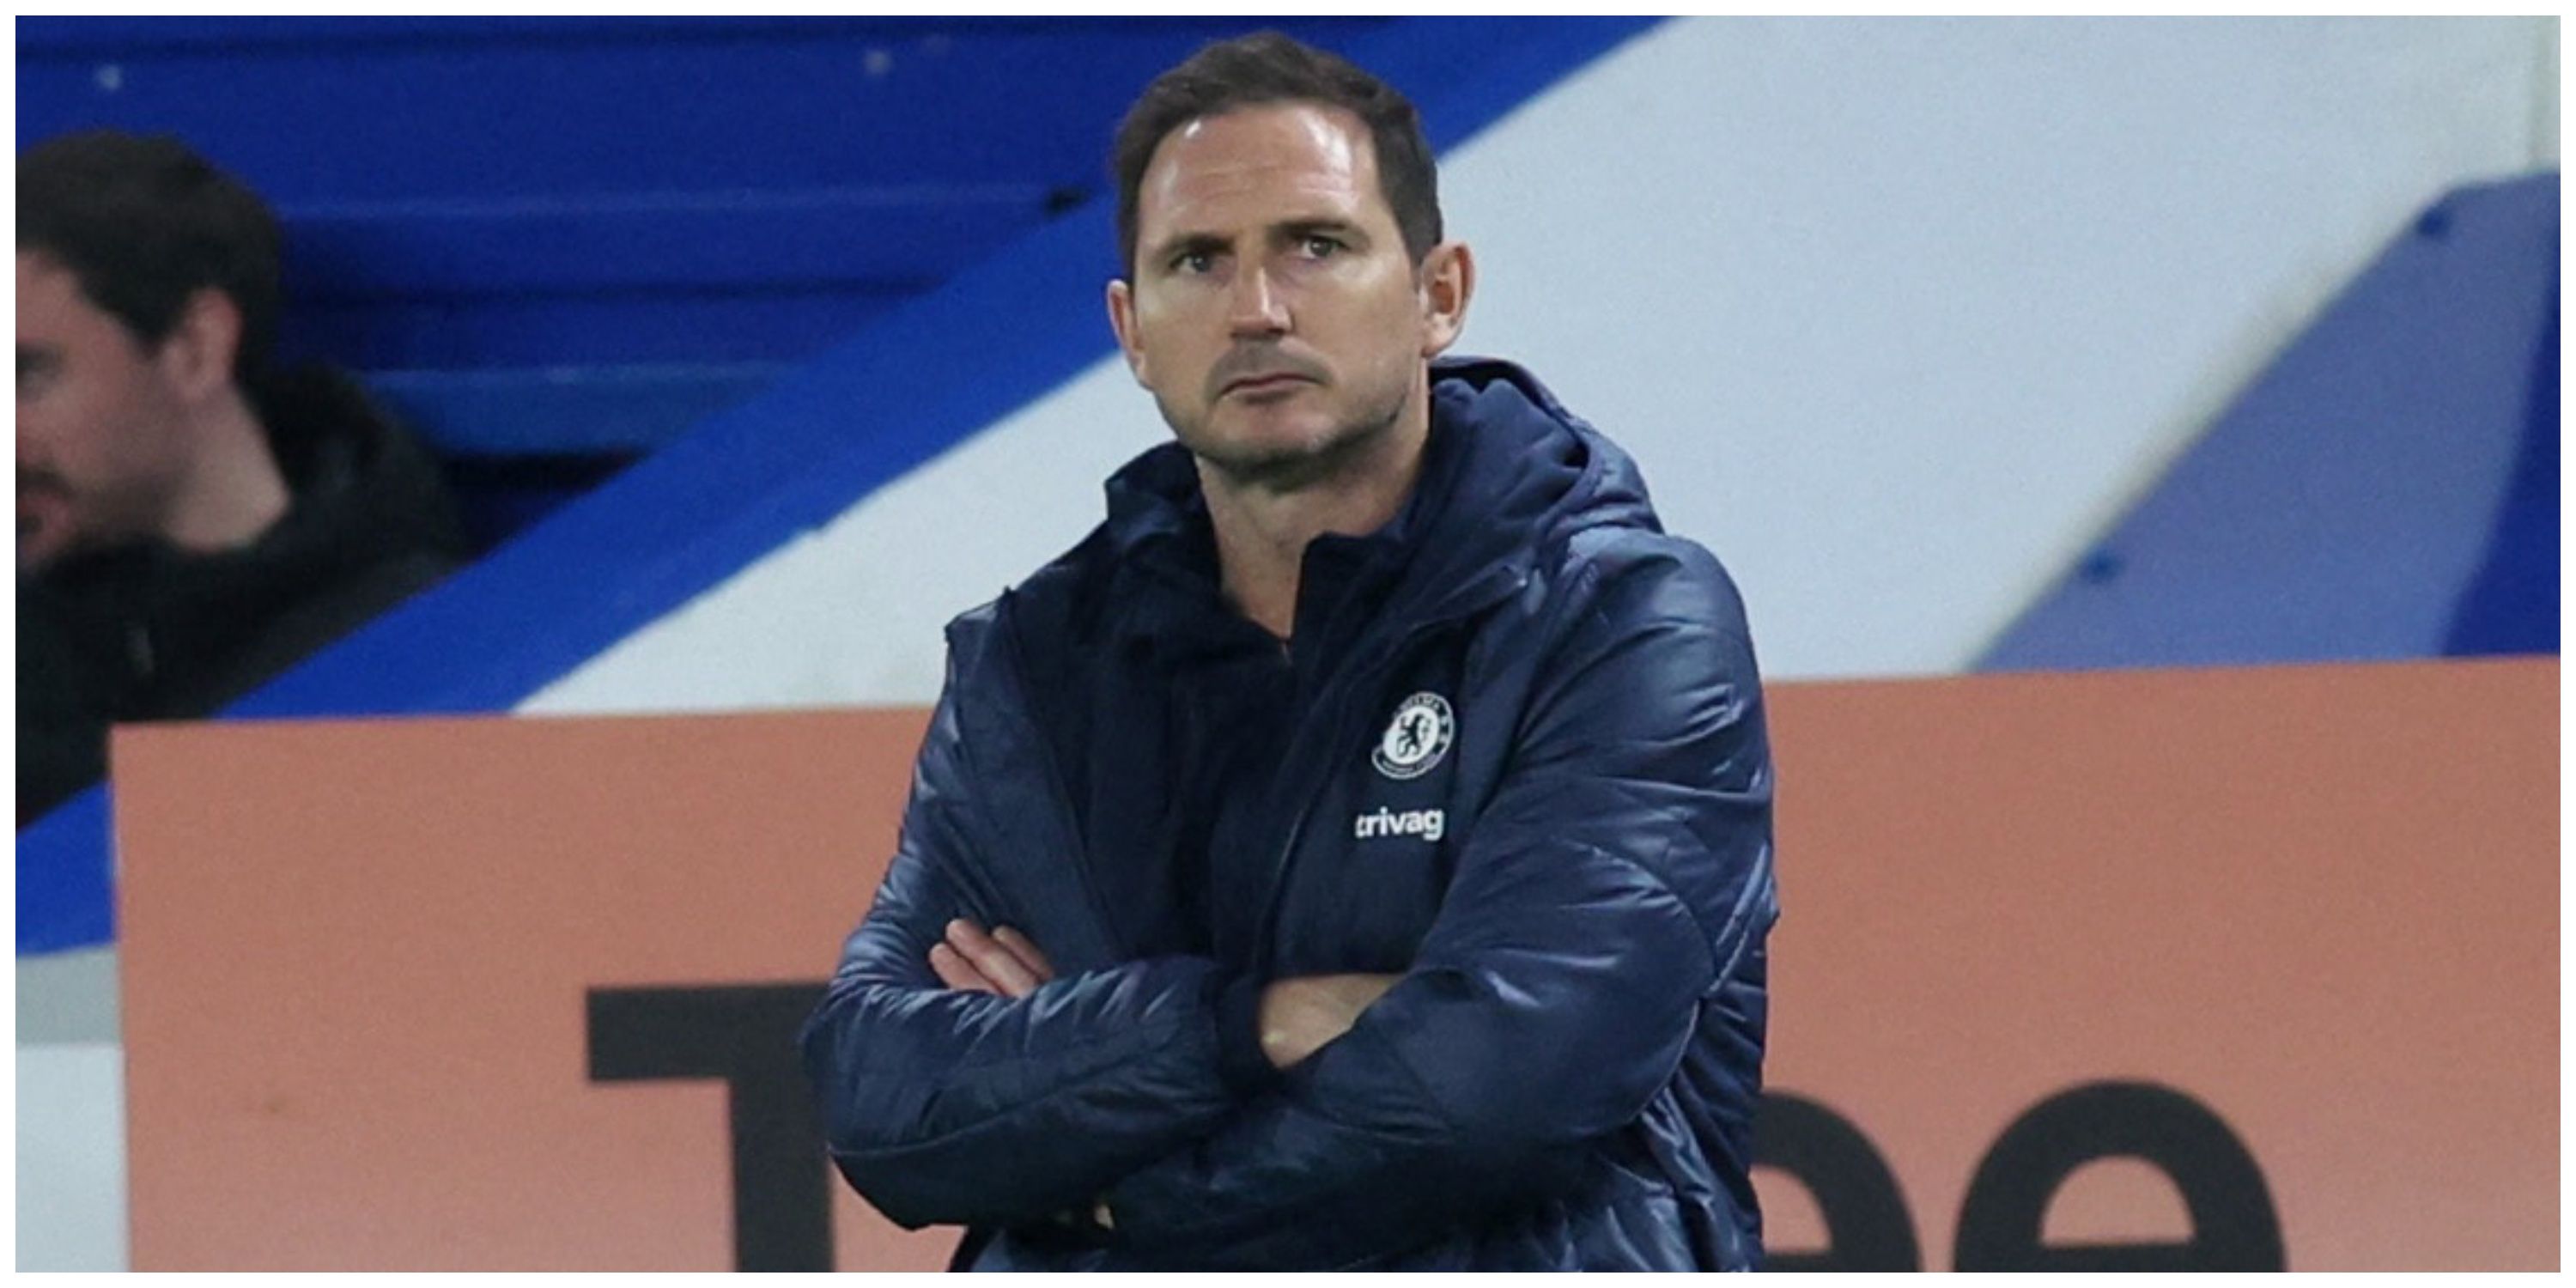 Chelsea interim manager Frank Lampard with arms crossed